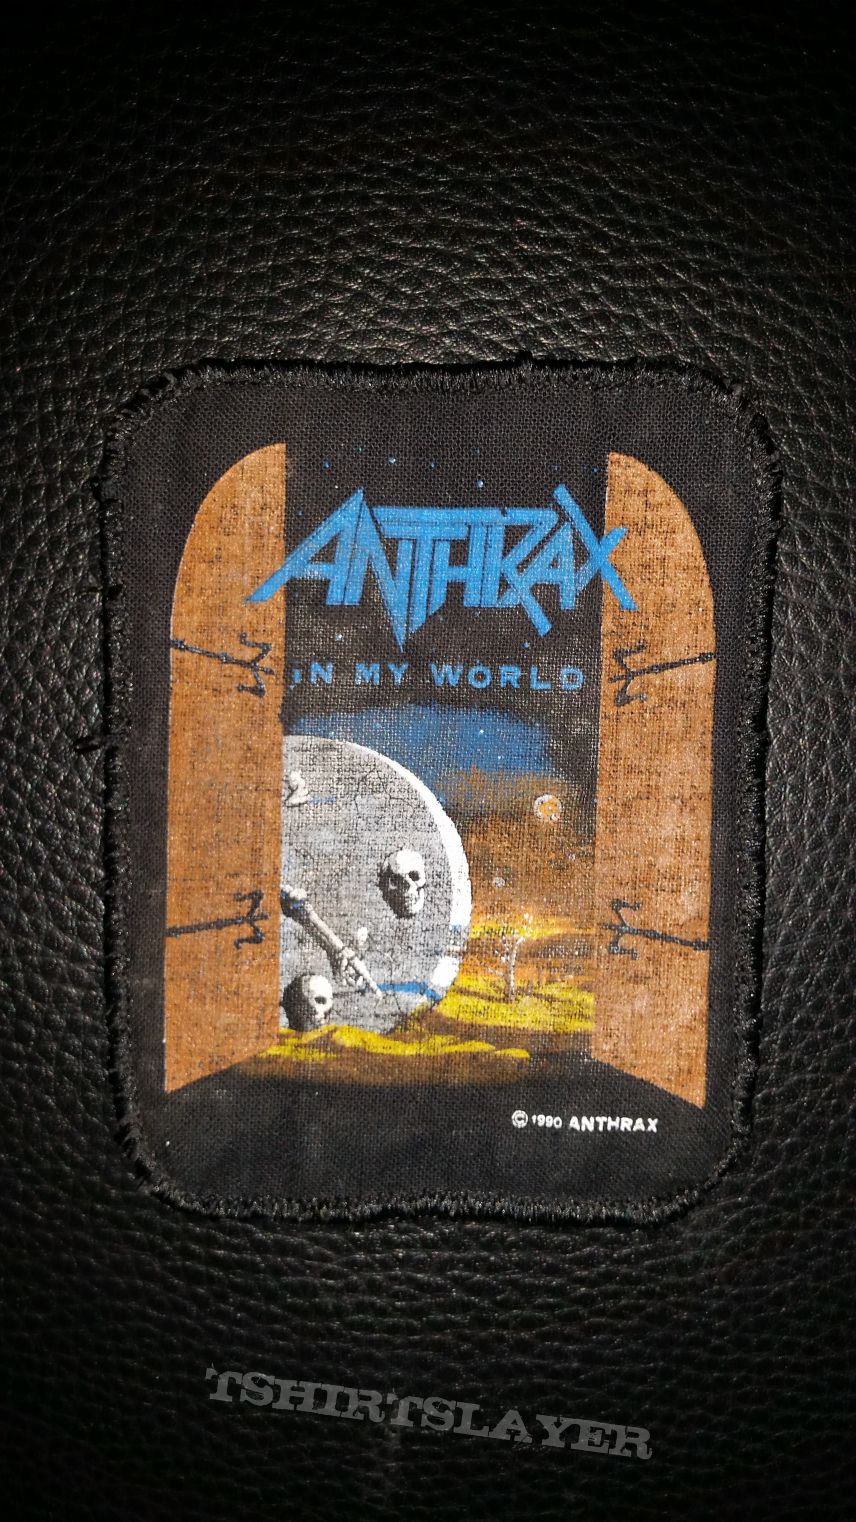 Anthrax patch